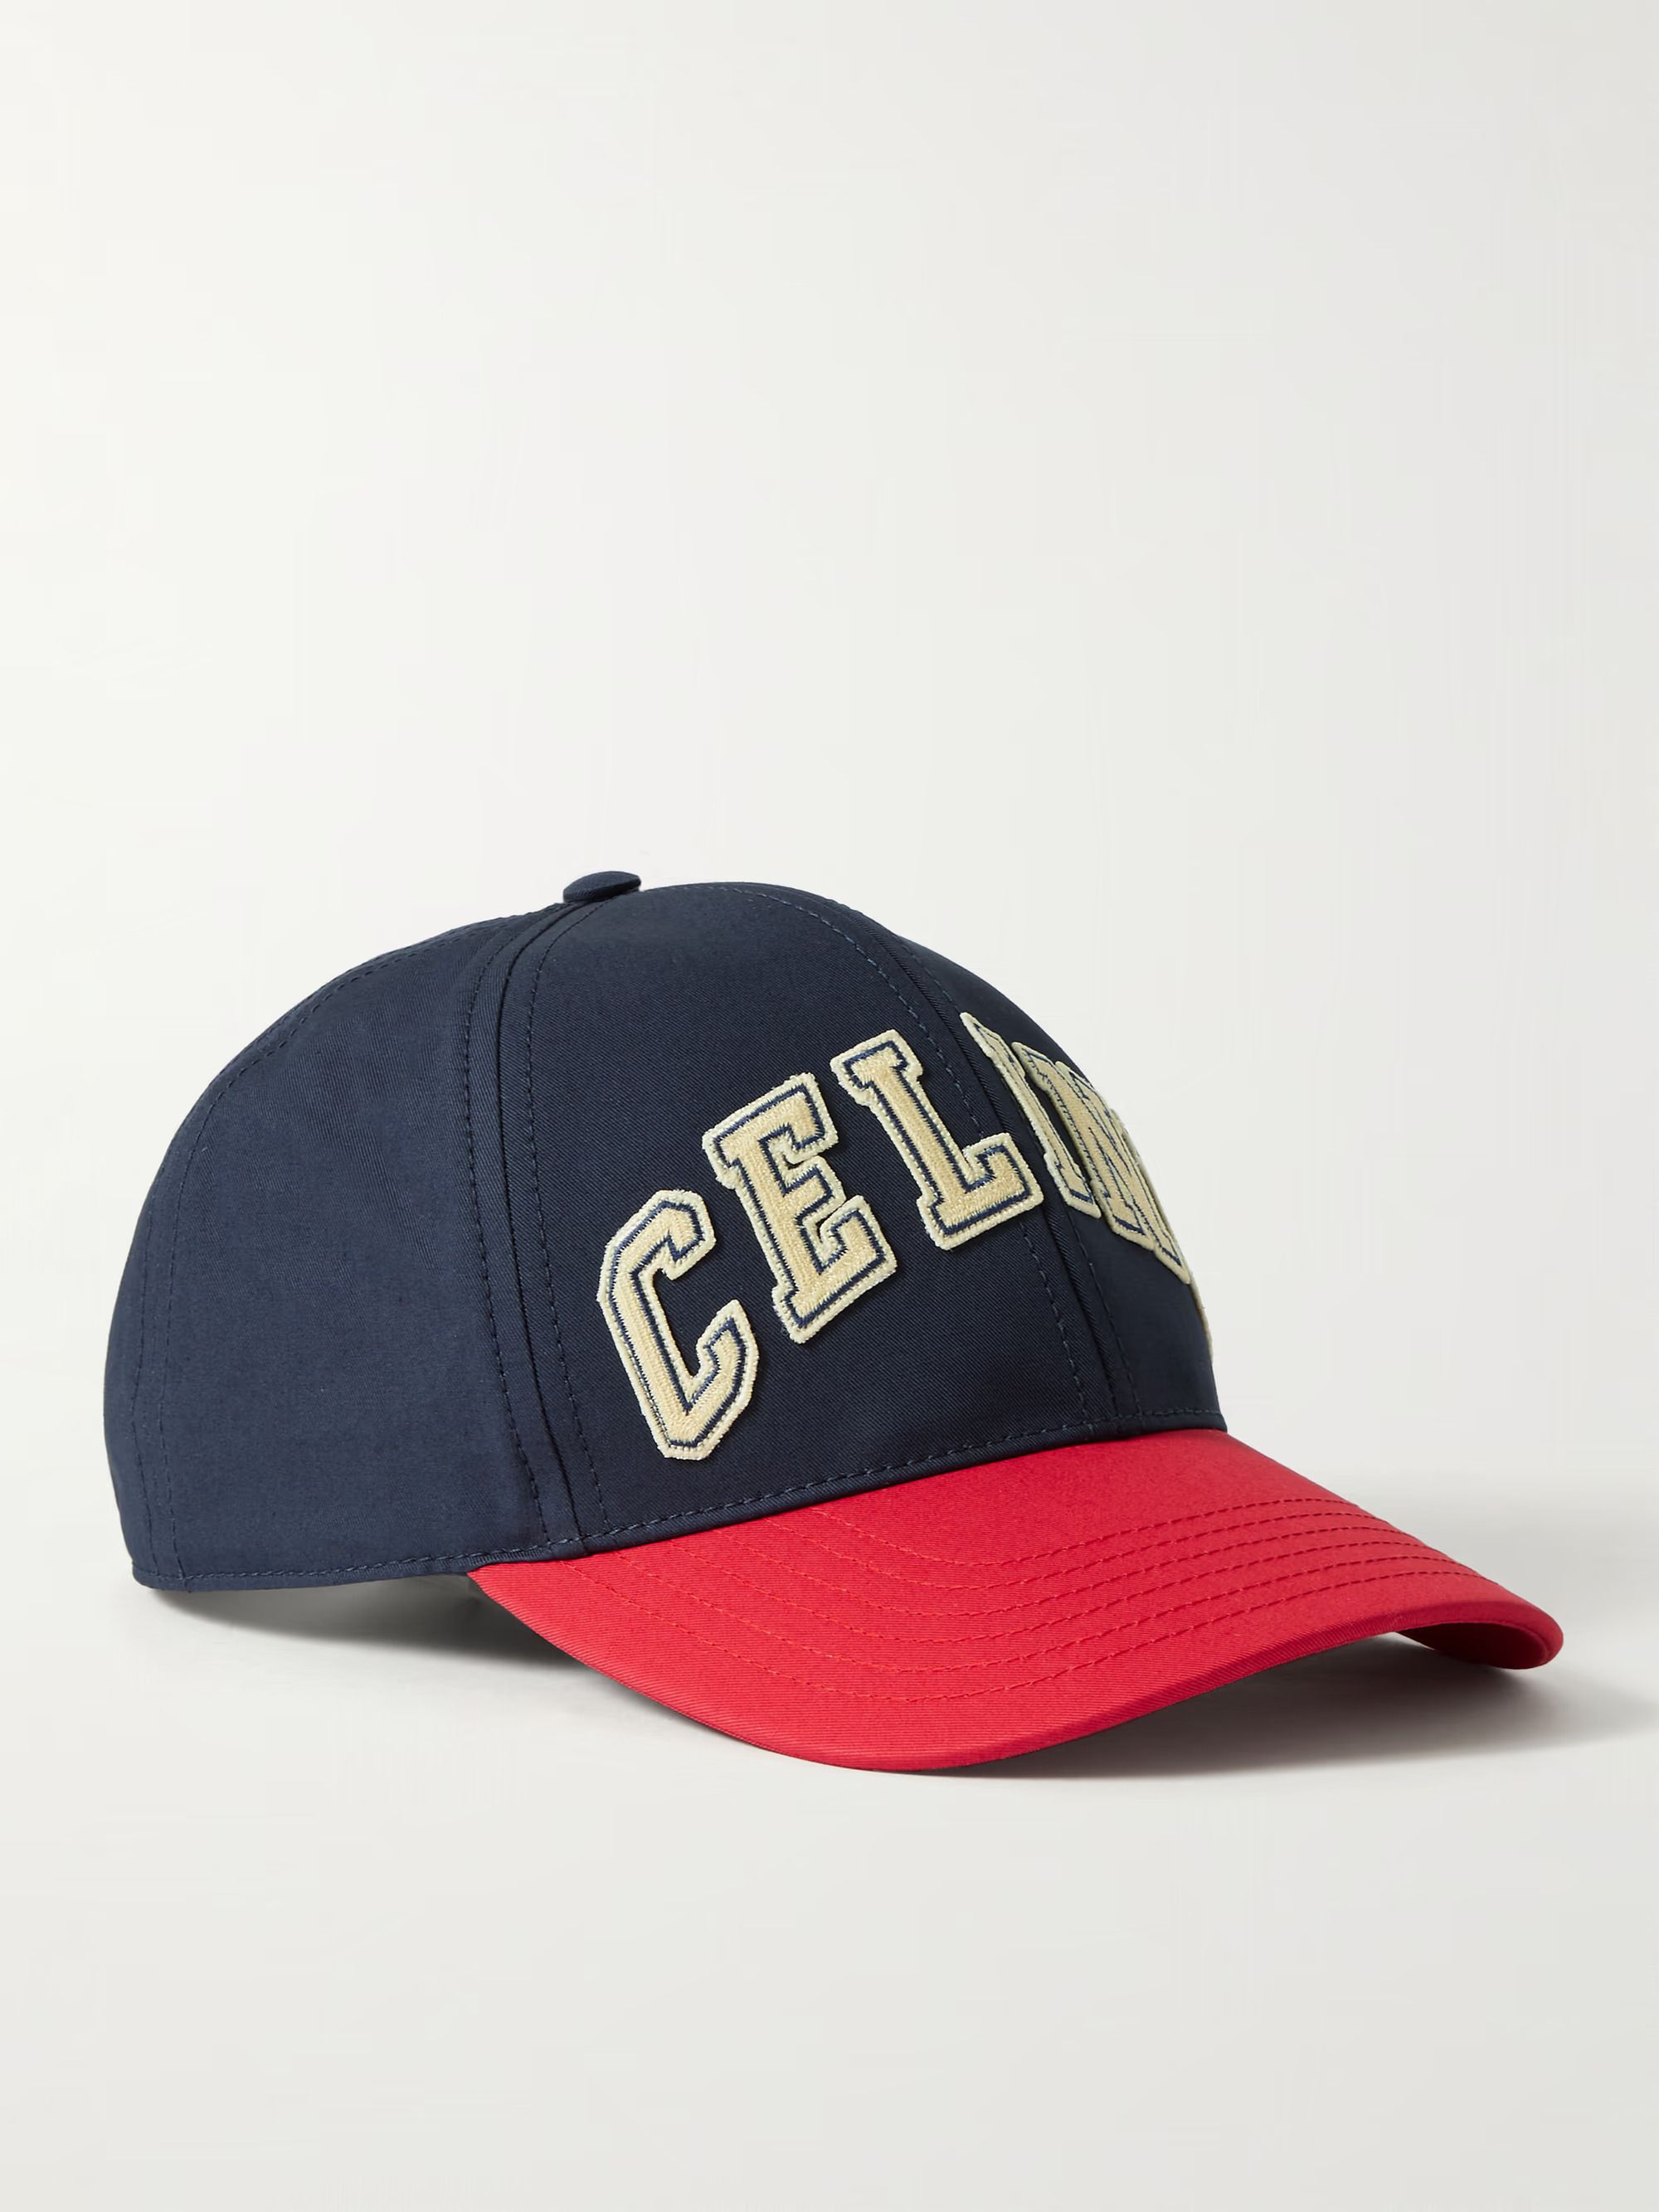 Best baseball caps for men 2021: Top baseball hats from Uniqlo, Patagonia,  Reiss and more